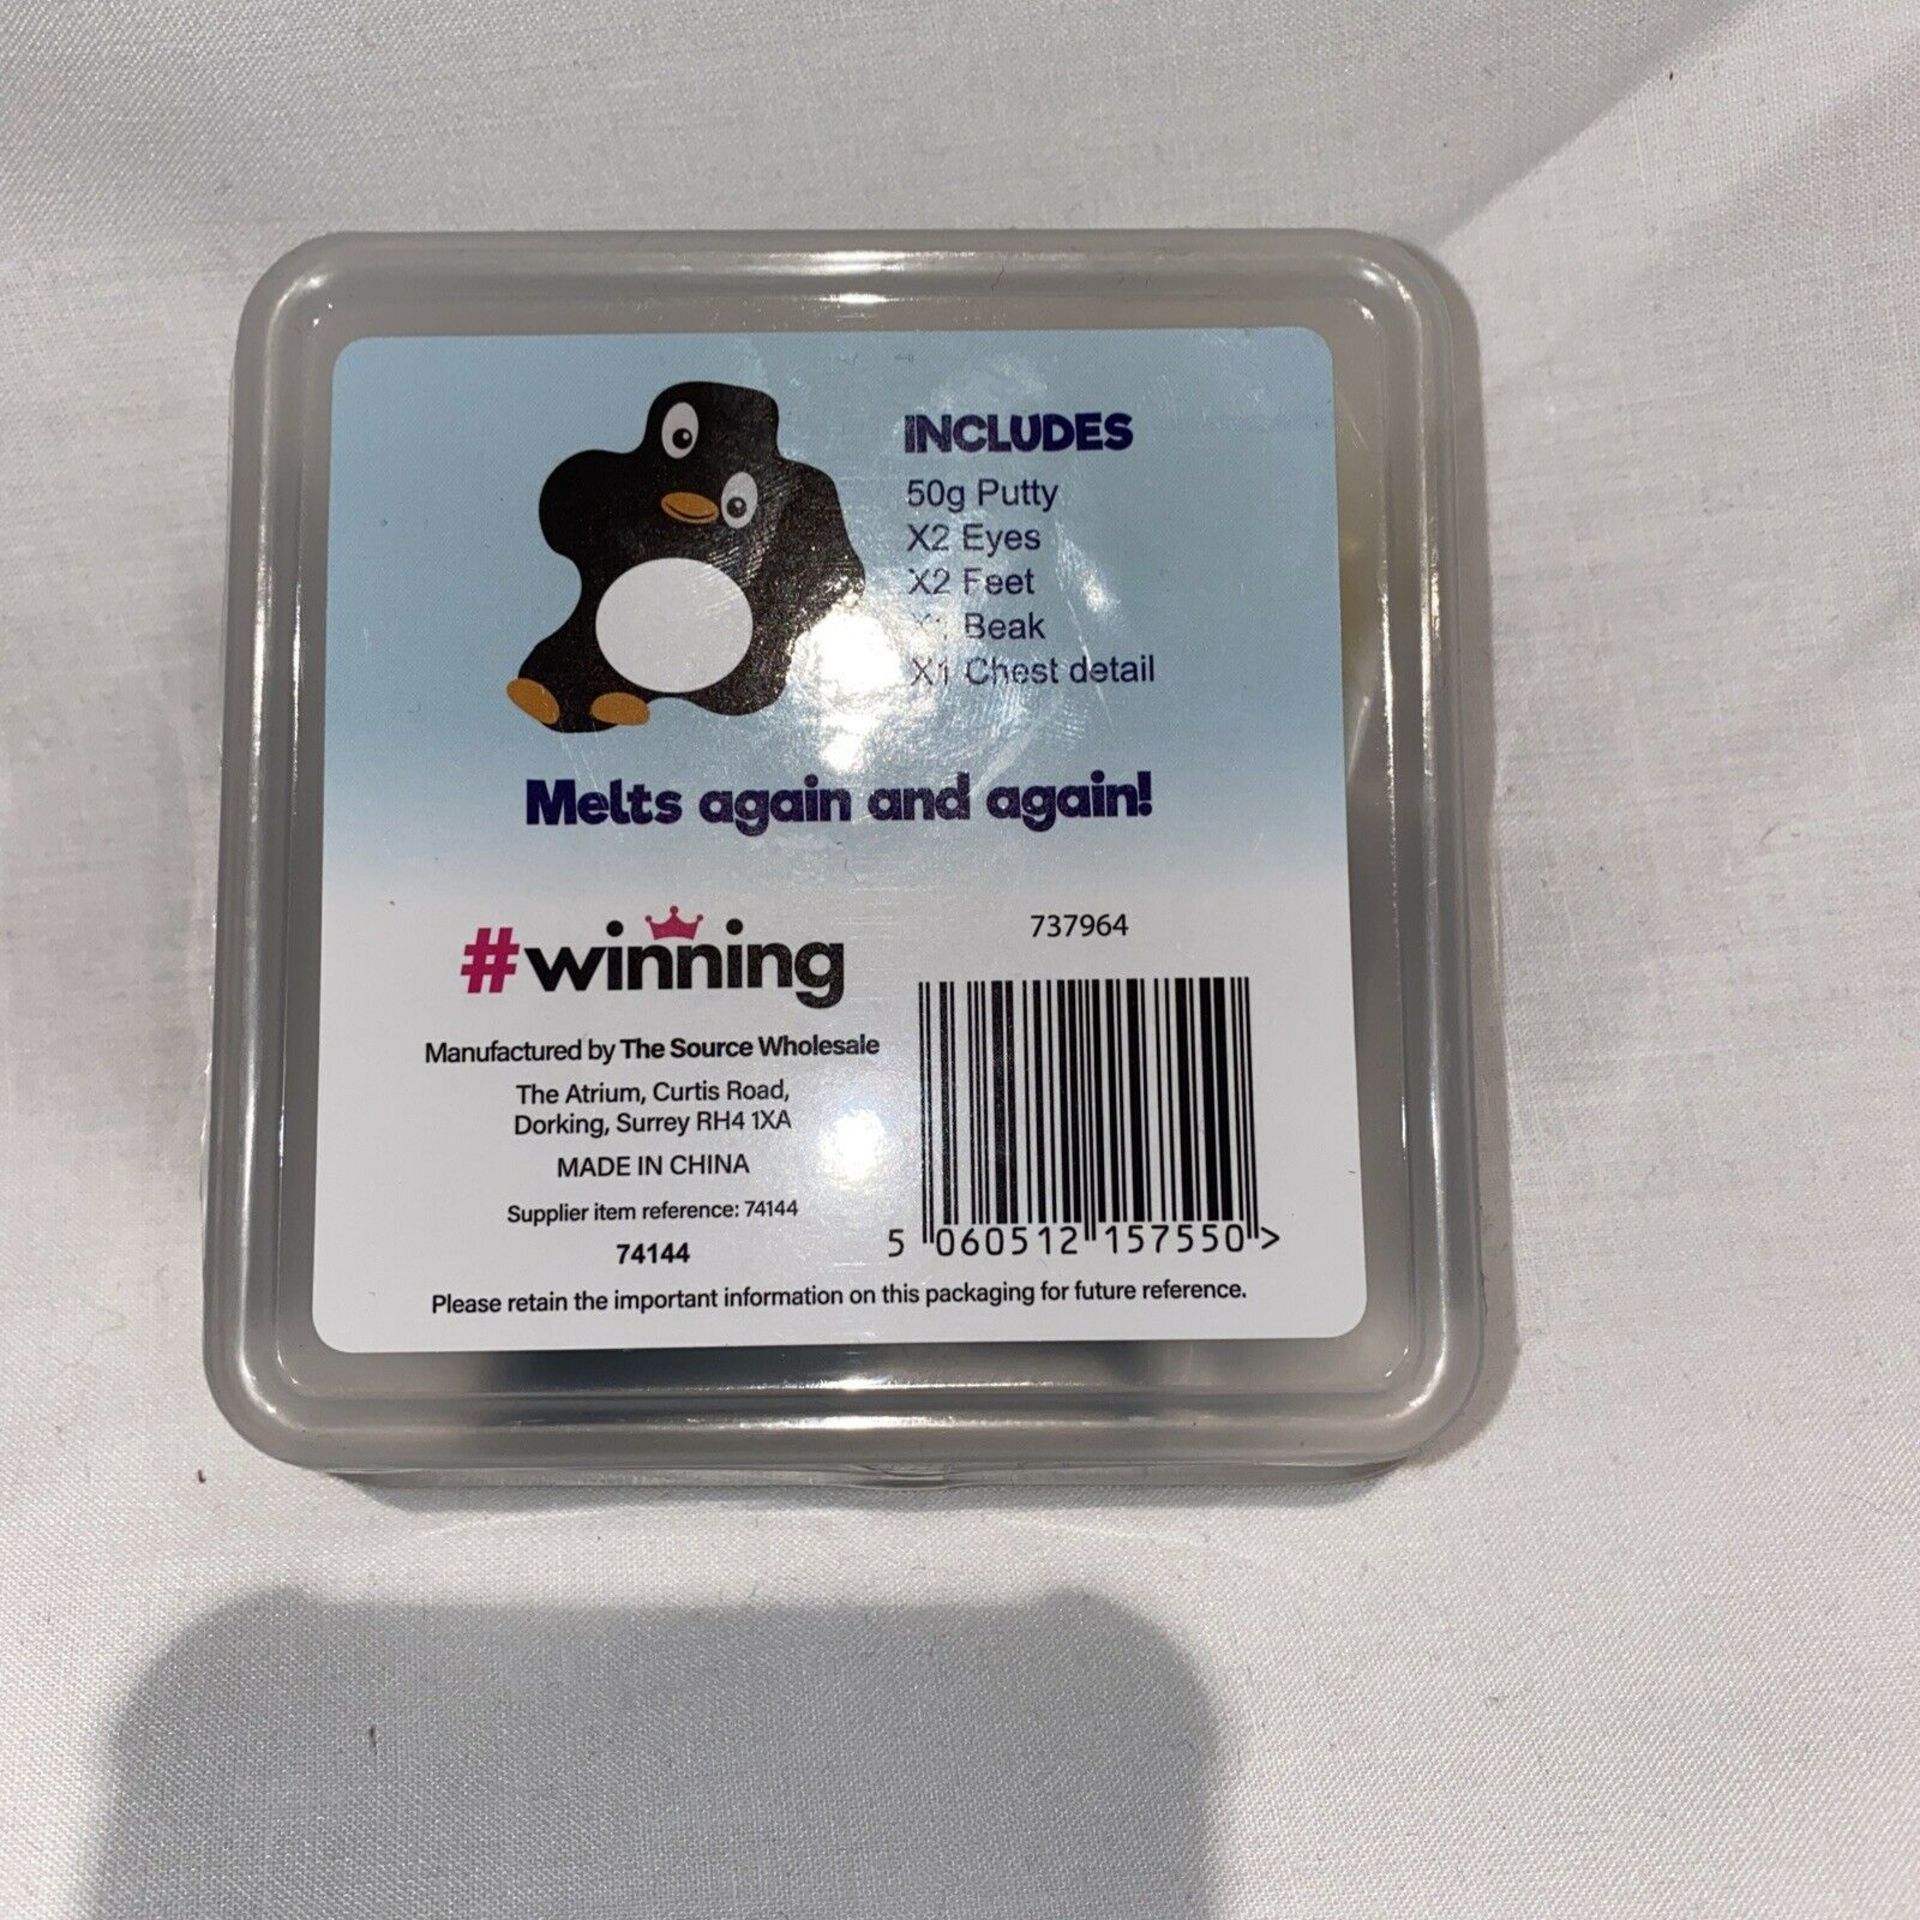 10 x melting penguin putty winning melts again & again christmas gift total rrp£60 - Image 2 of 3